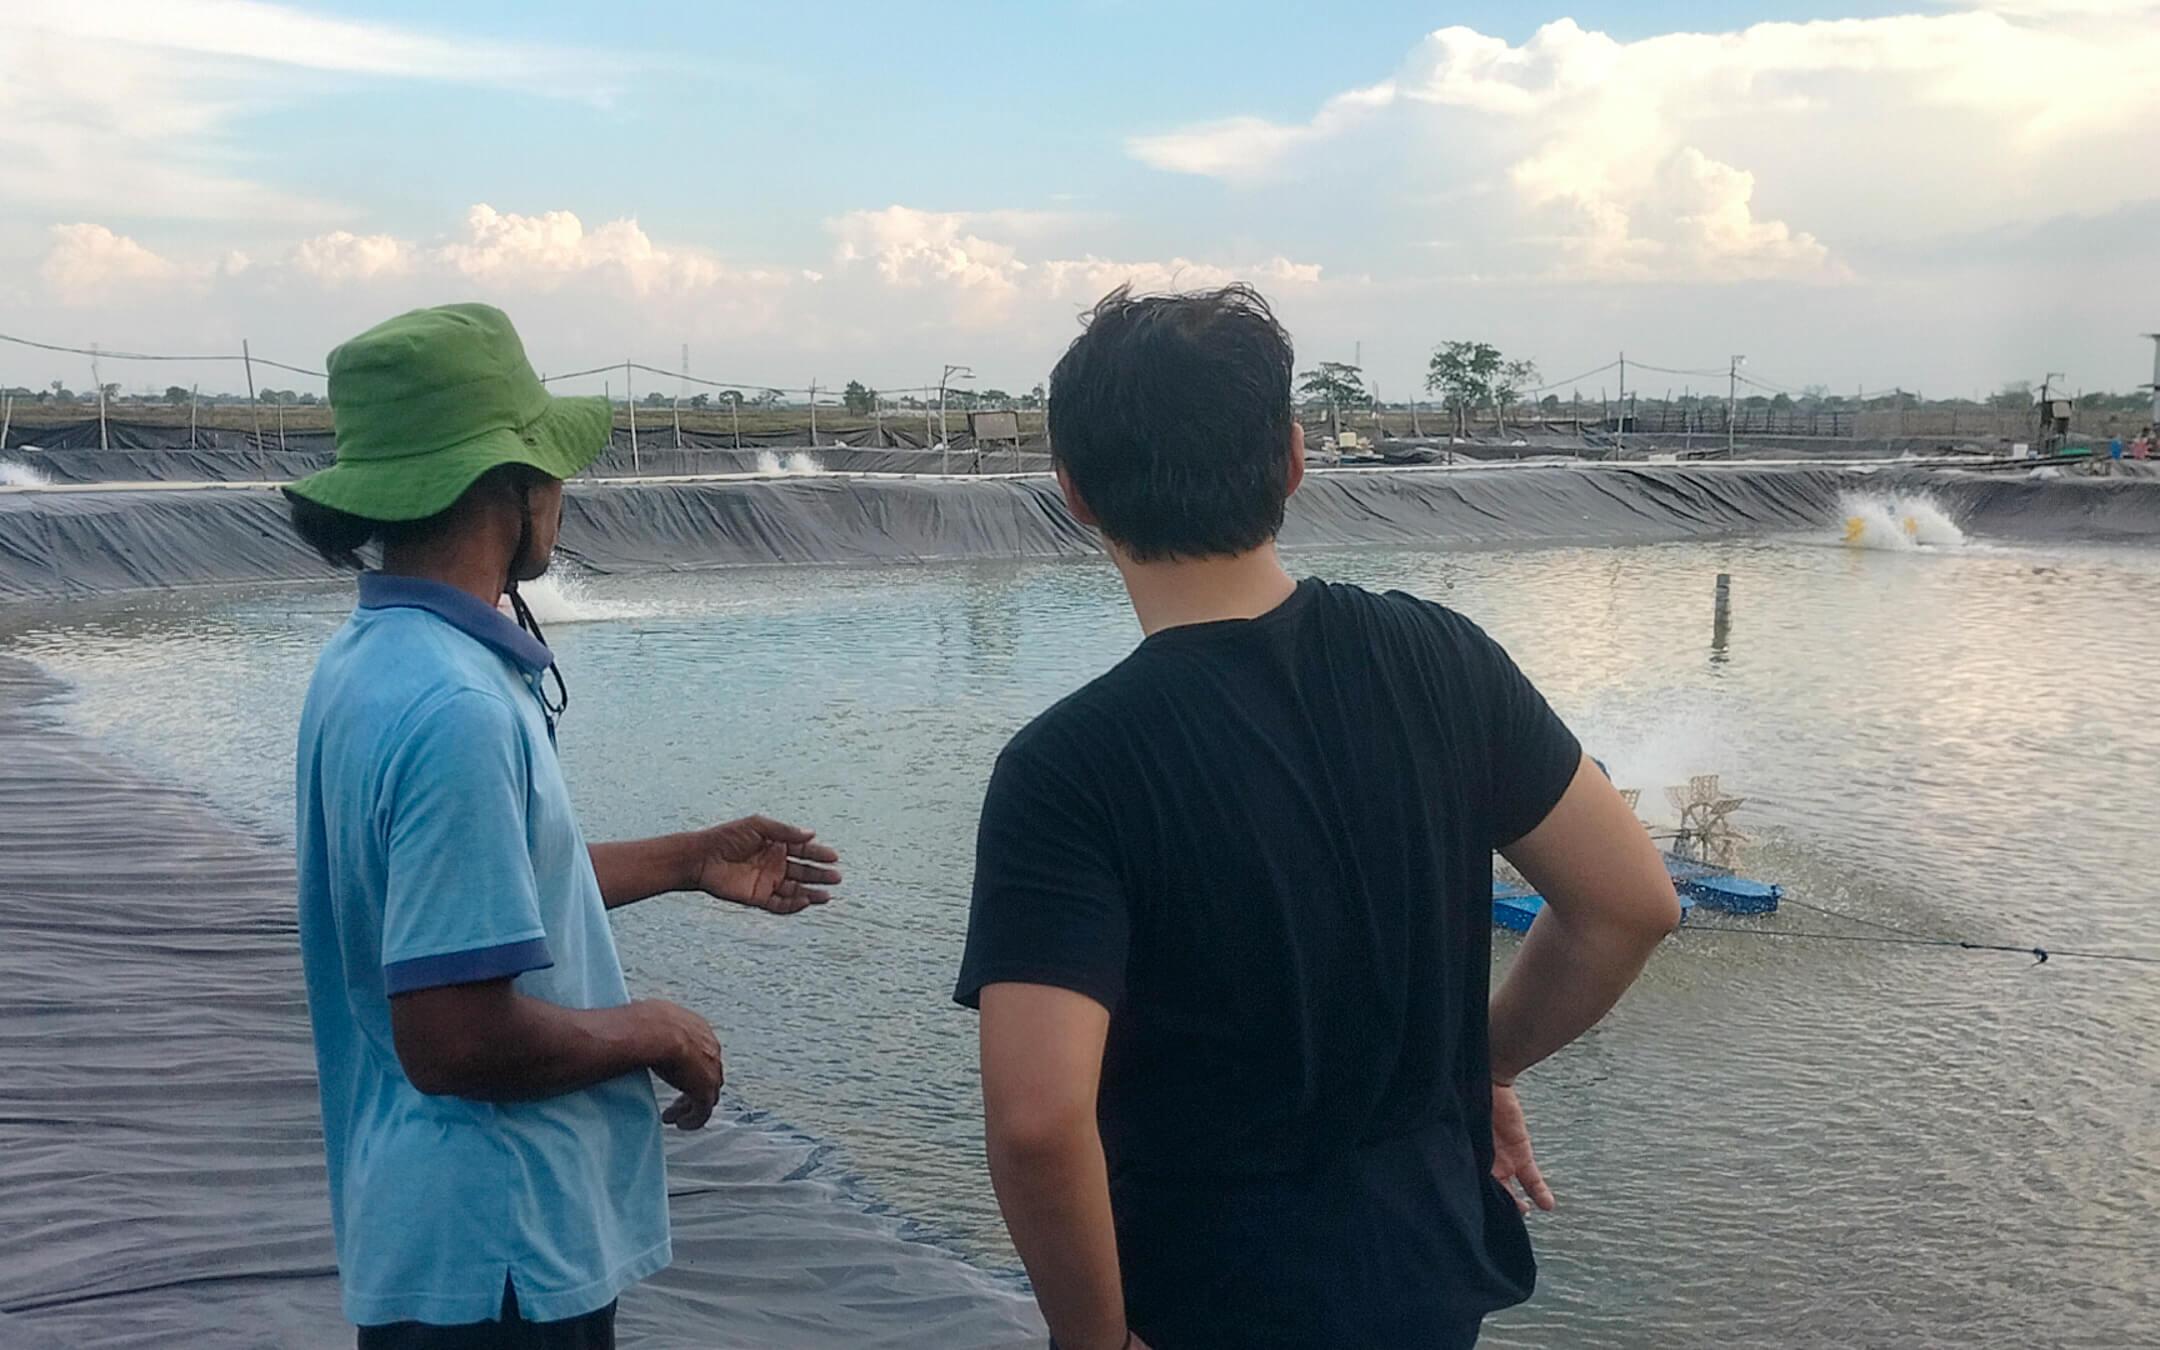 Mass production using these conventional fish farming methods has resulted in severe climate challenges throughout Indonesia.
Photo: Crustea